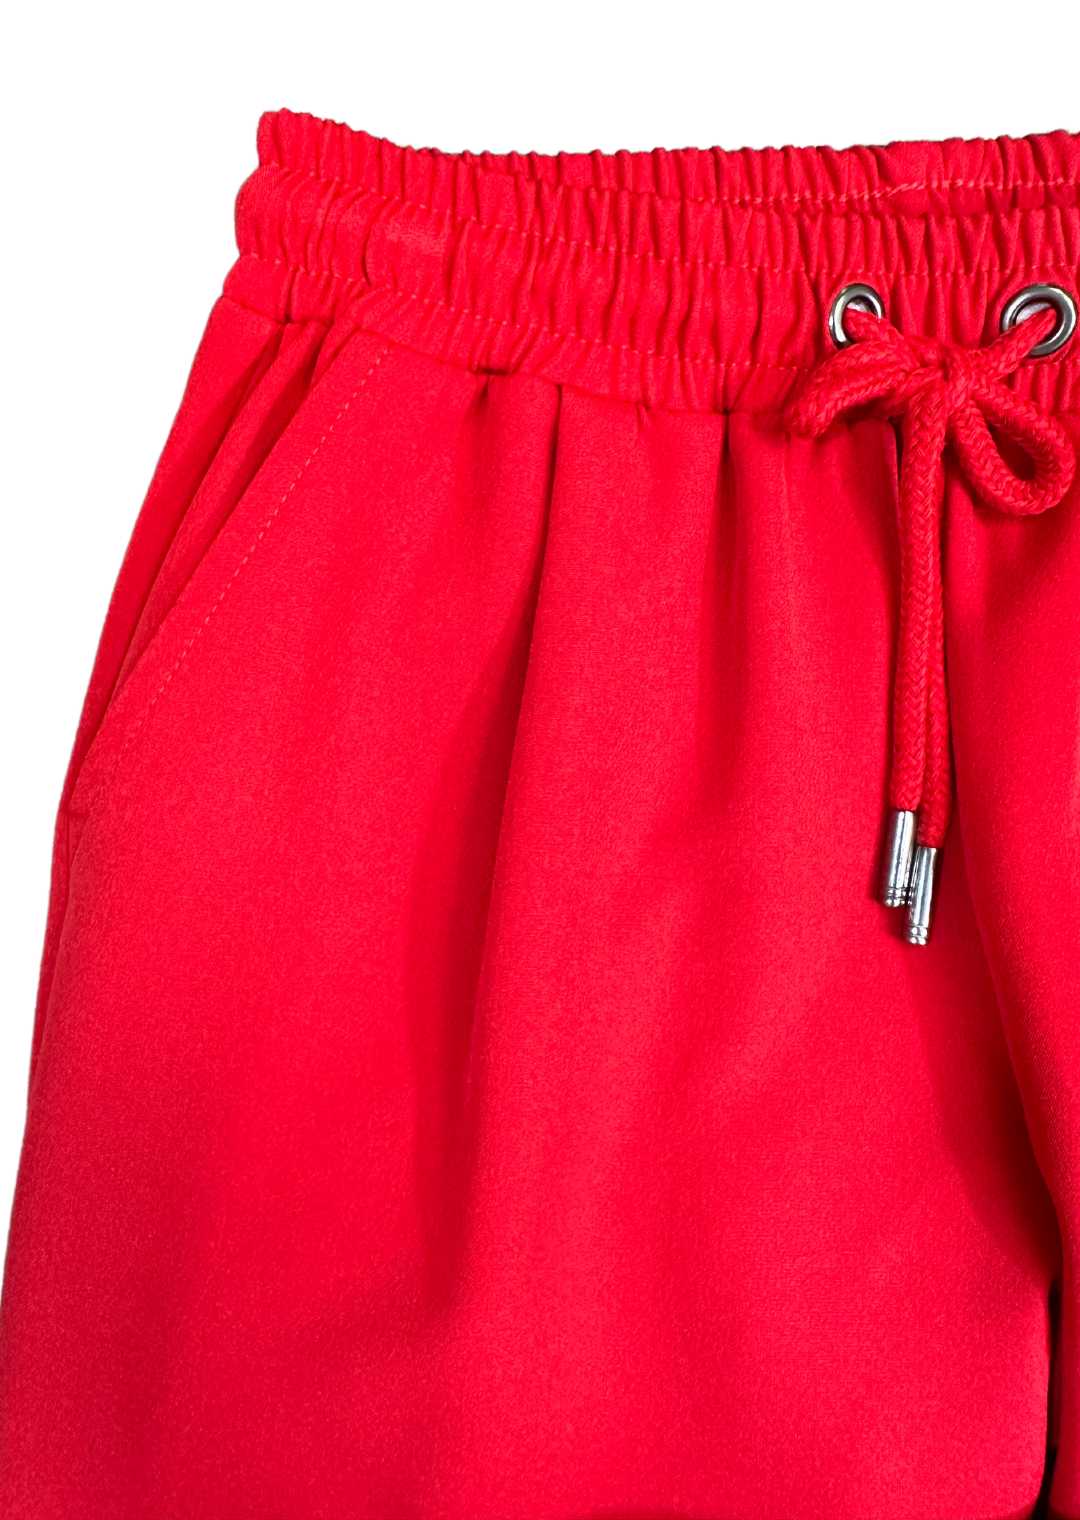 InCity Girls Toddler Tween 1-14 Years Red Comfy Holiday Cowper Jogger Pants InCity Boys Girls